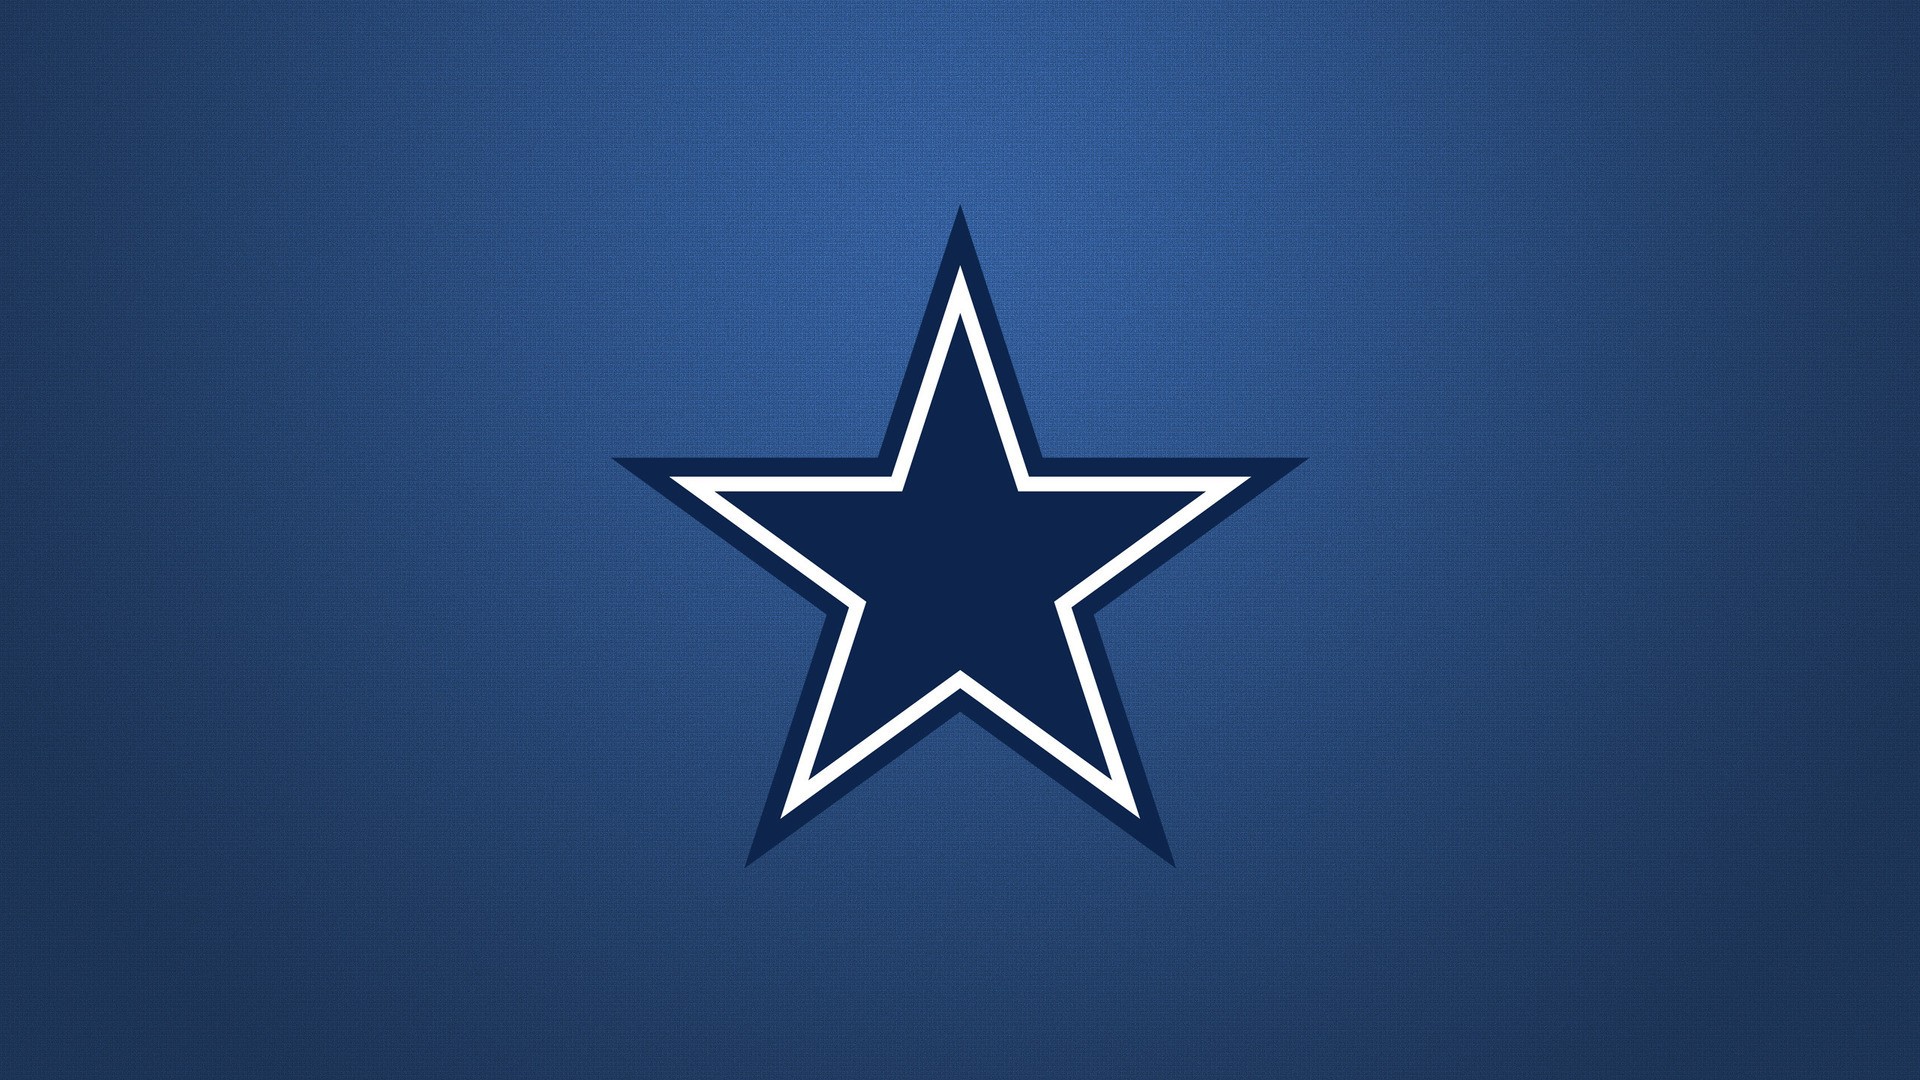 Dallas Cowboys Images Wallpapers - Wallpaper Zone